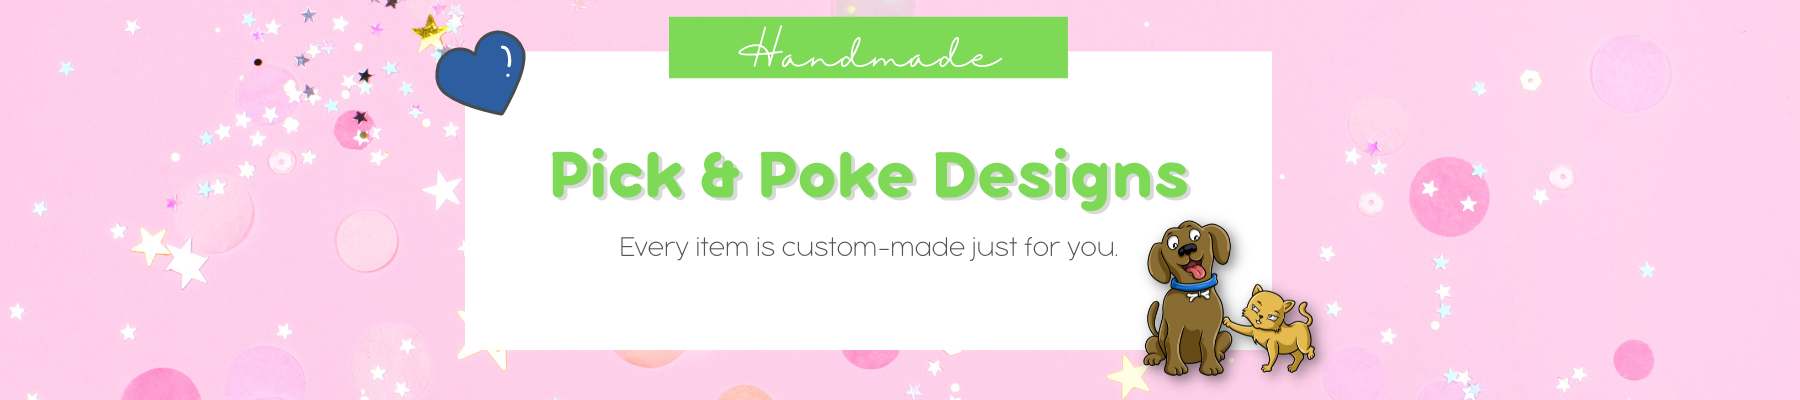 Pink and Green Pick and Poke Designs Banner with Blue Heart and Logo